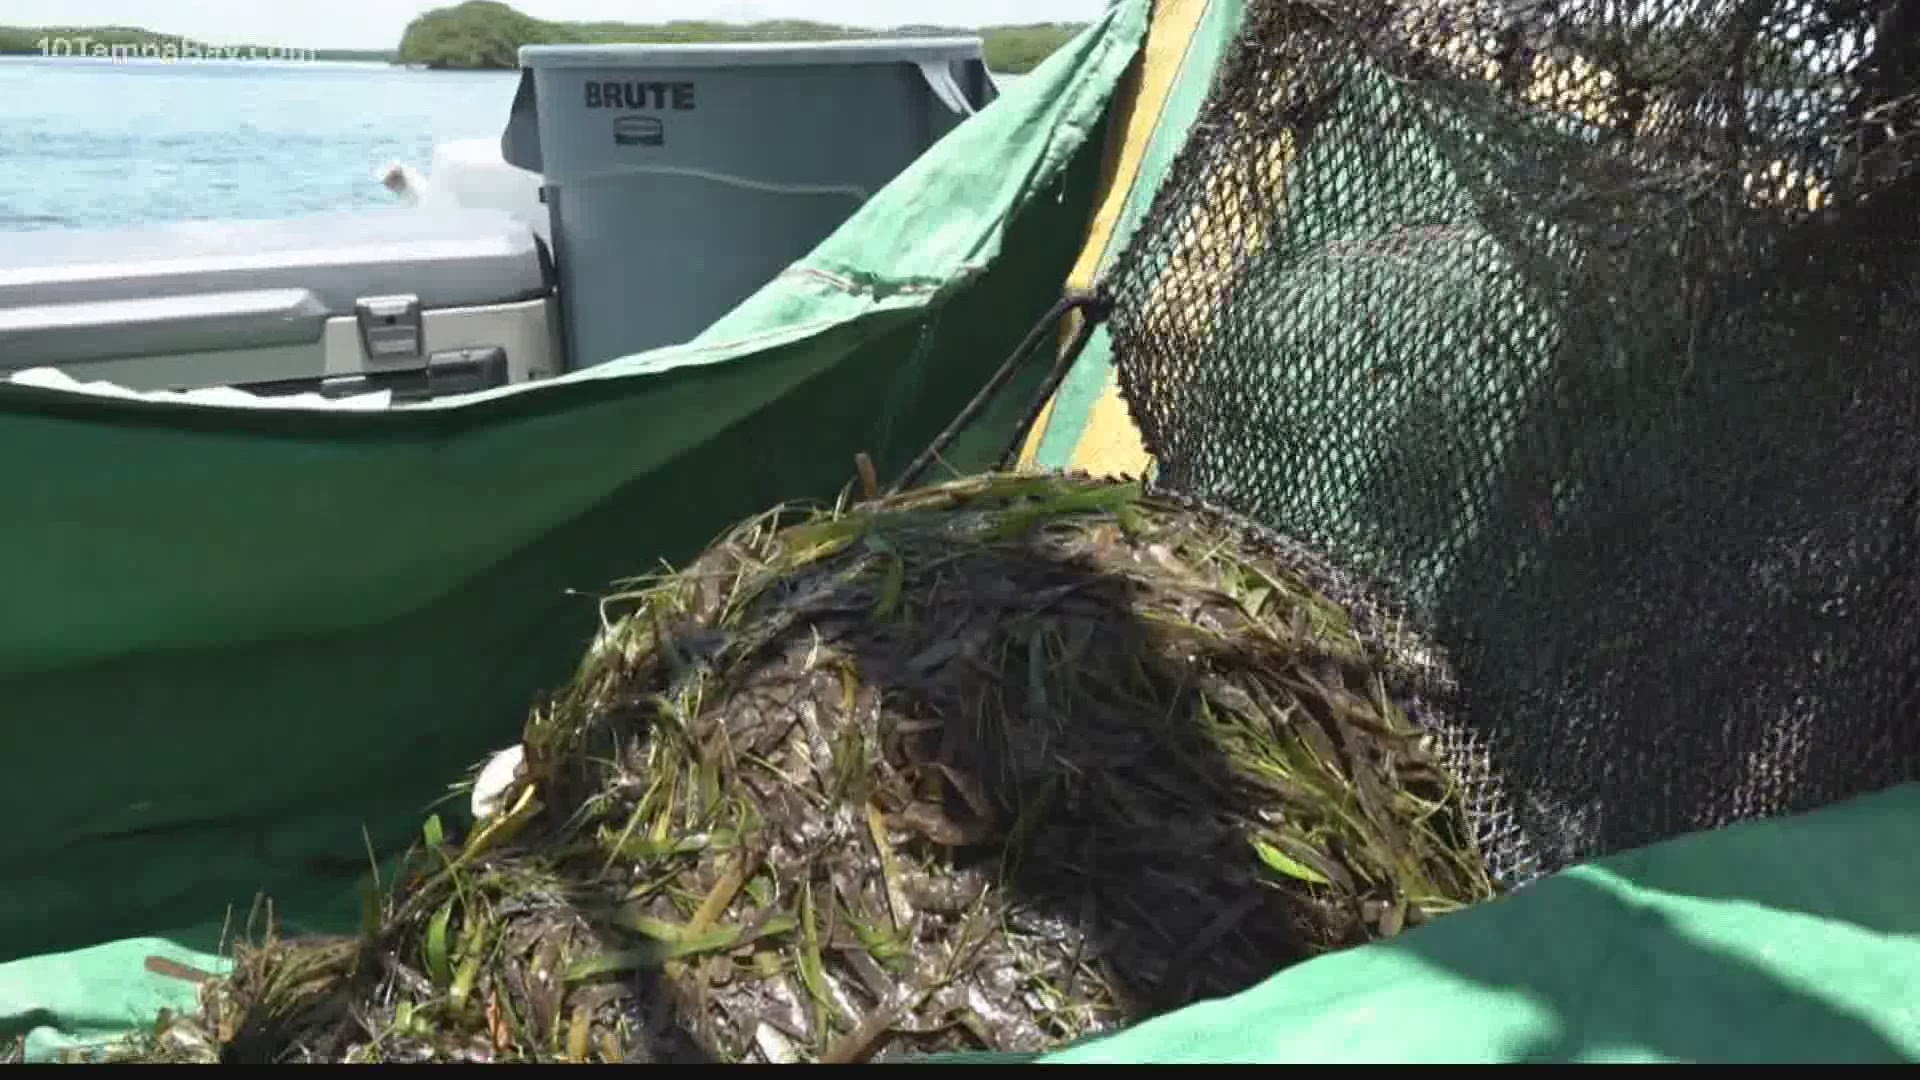 Roughly 200 city employees in St. Petersburg are cleaning up dead marine life, pulling them away from other jobs.